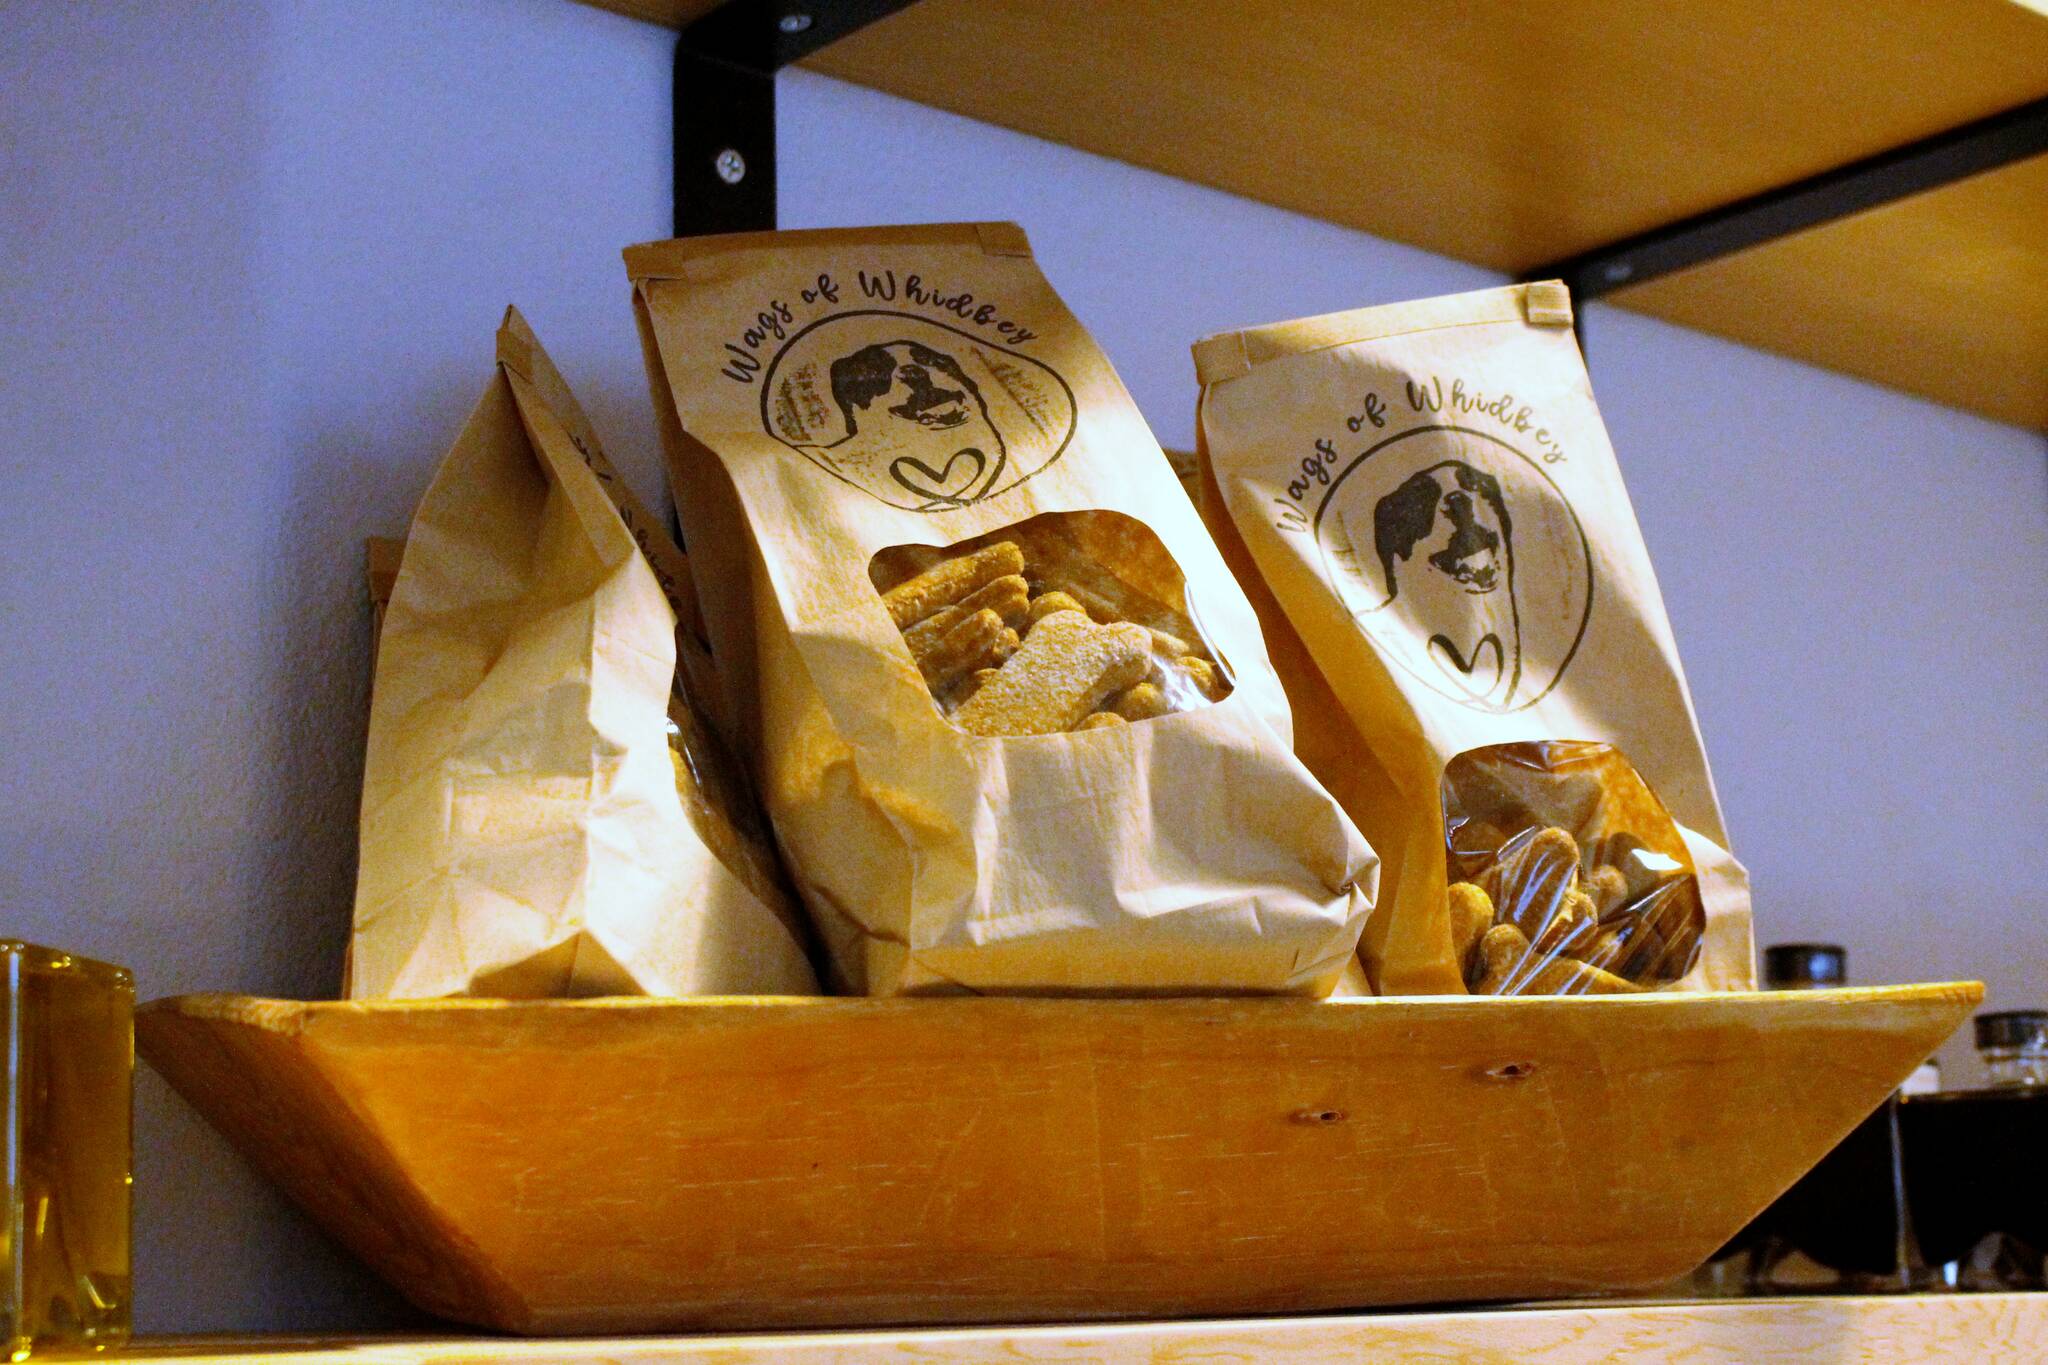 Photo by Kira Erickson/South Whidbey Record
A “Wag Bag,” pictured here in Seabiscuit Bakery.